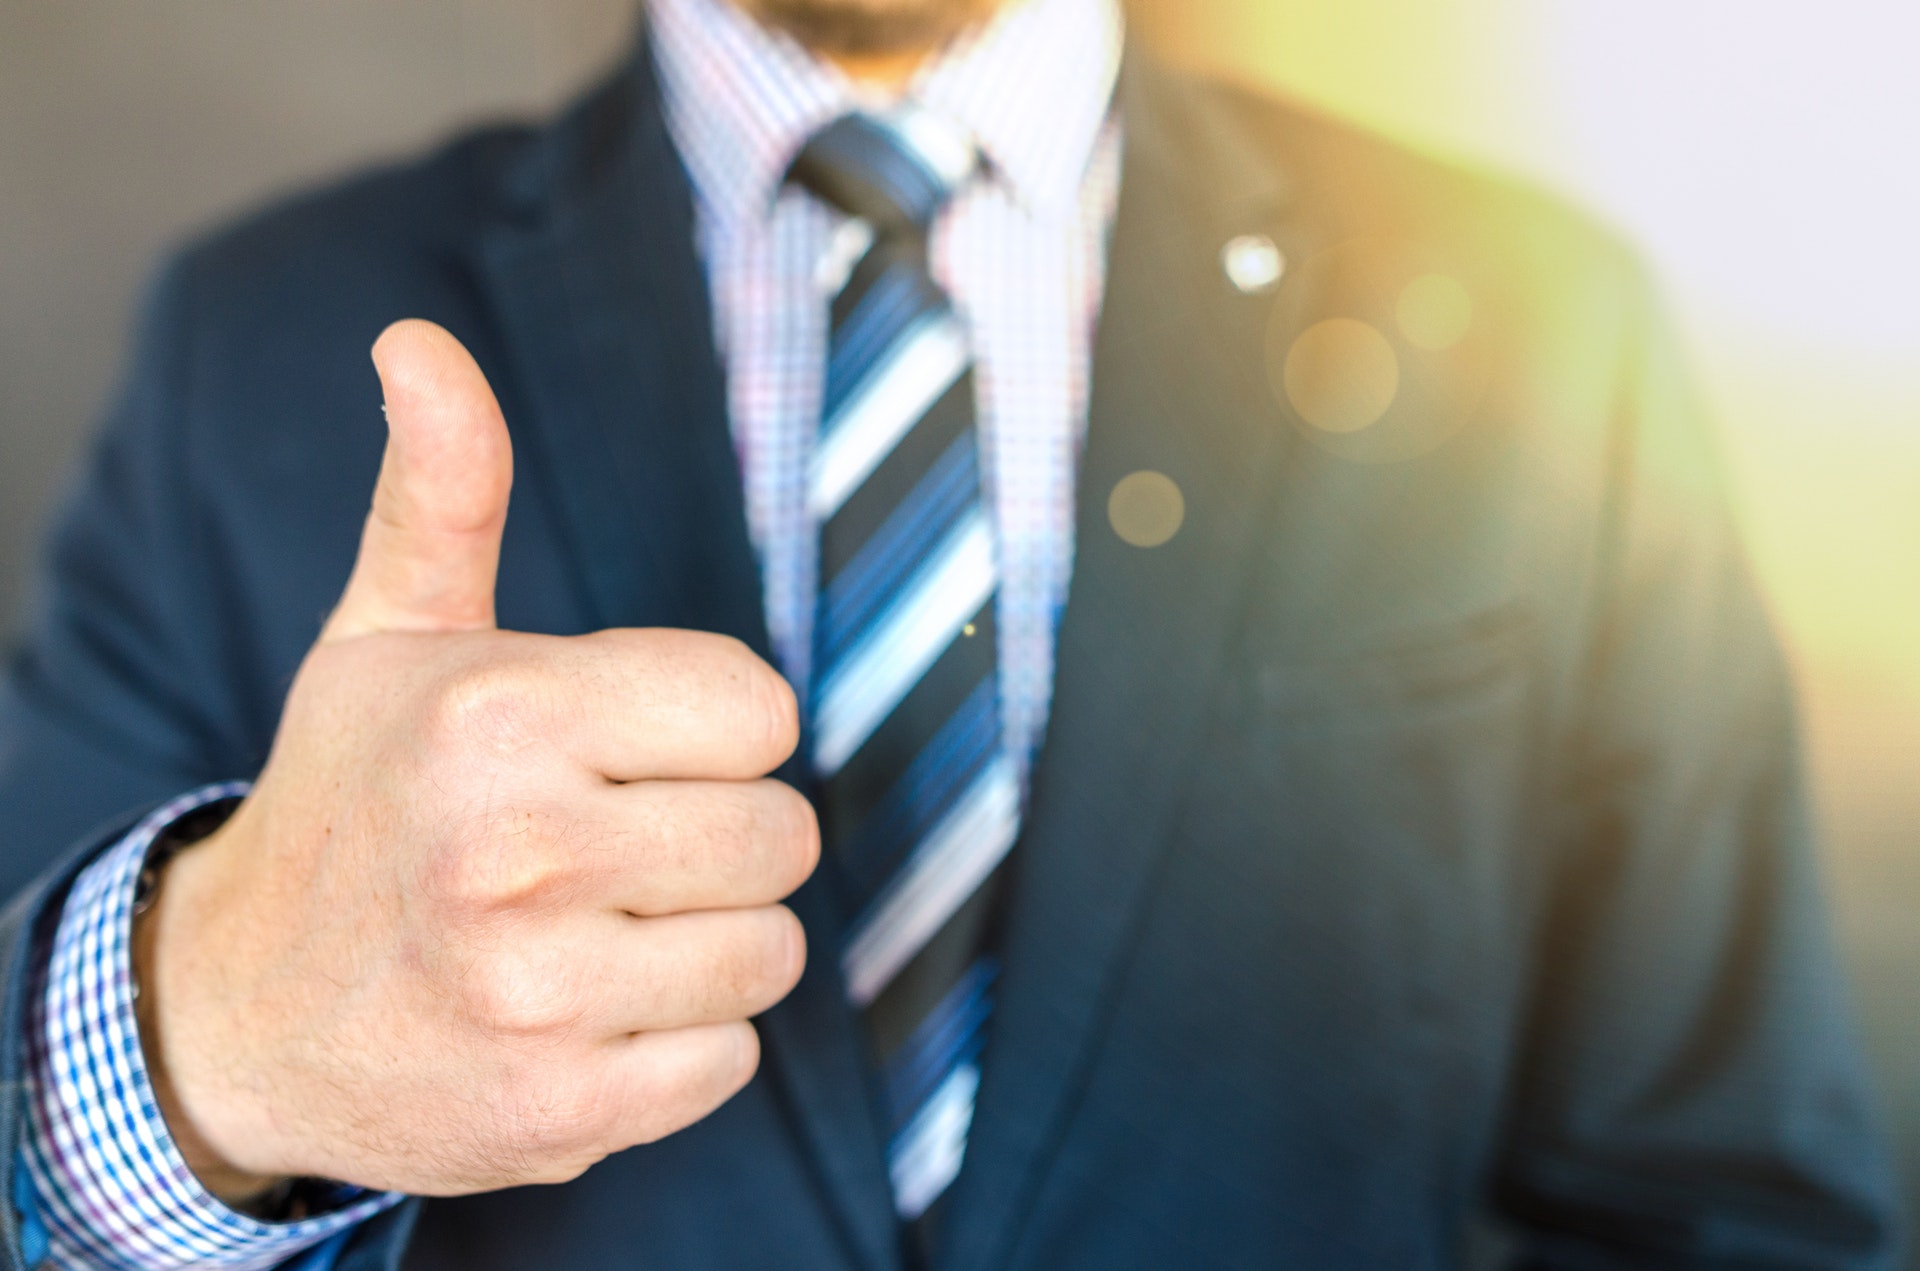 focus on thumbs up with background of person in suit blurry